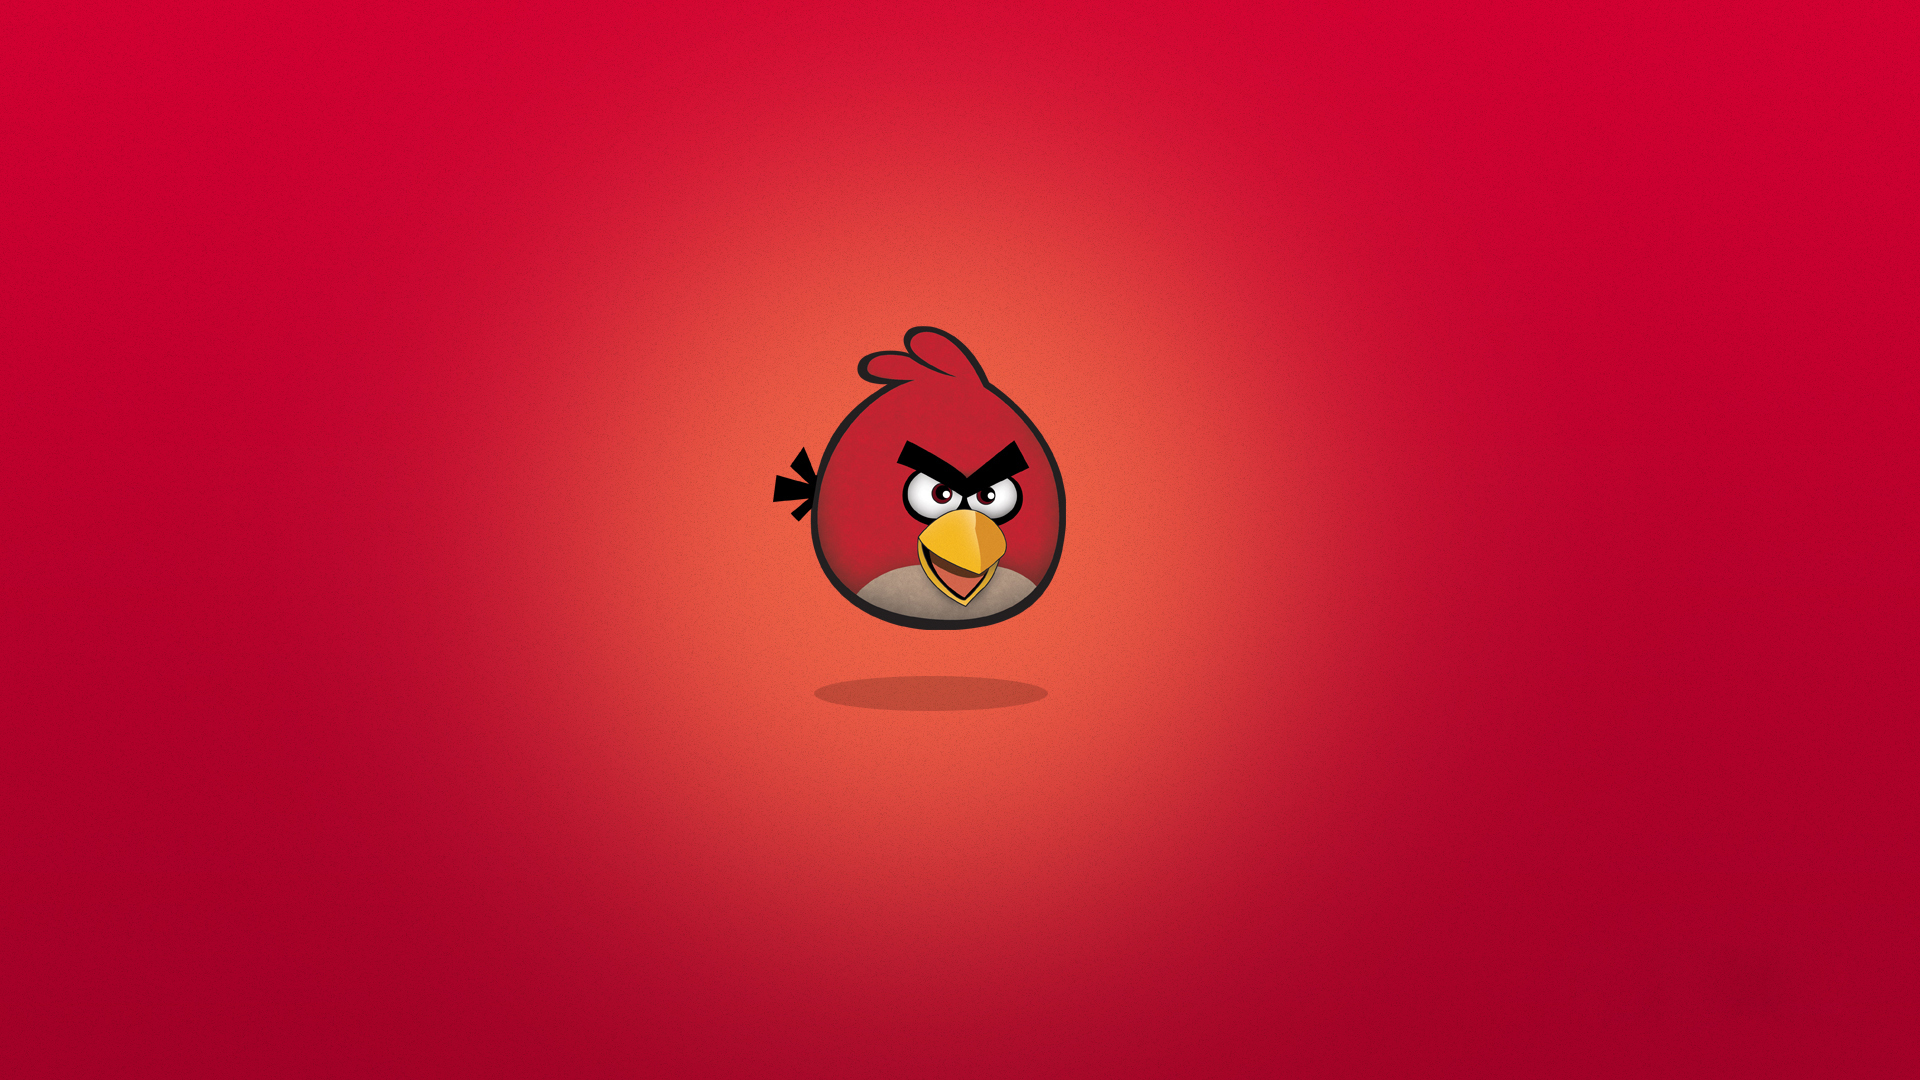 Angry Birds Wallpapers Desktop Wallpapers Angry Birds Wallpaper 7